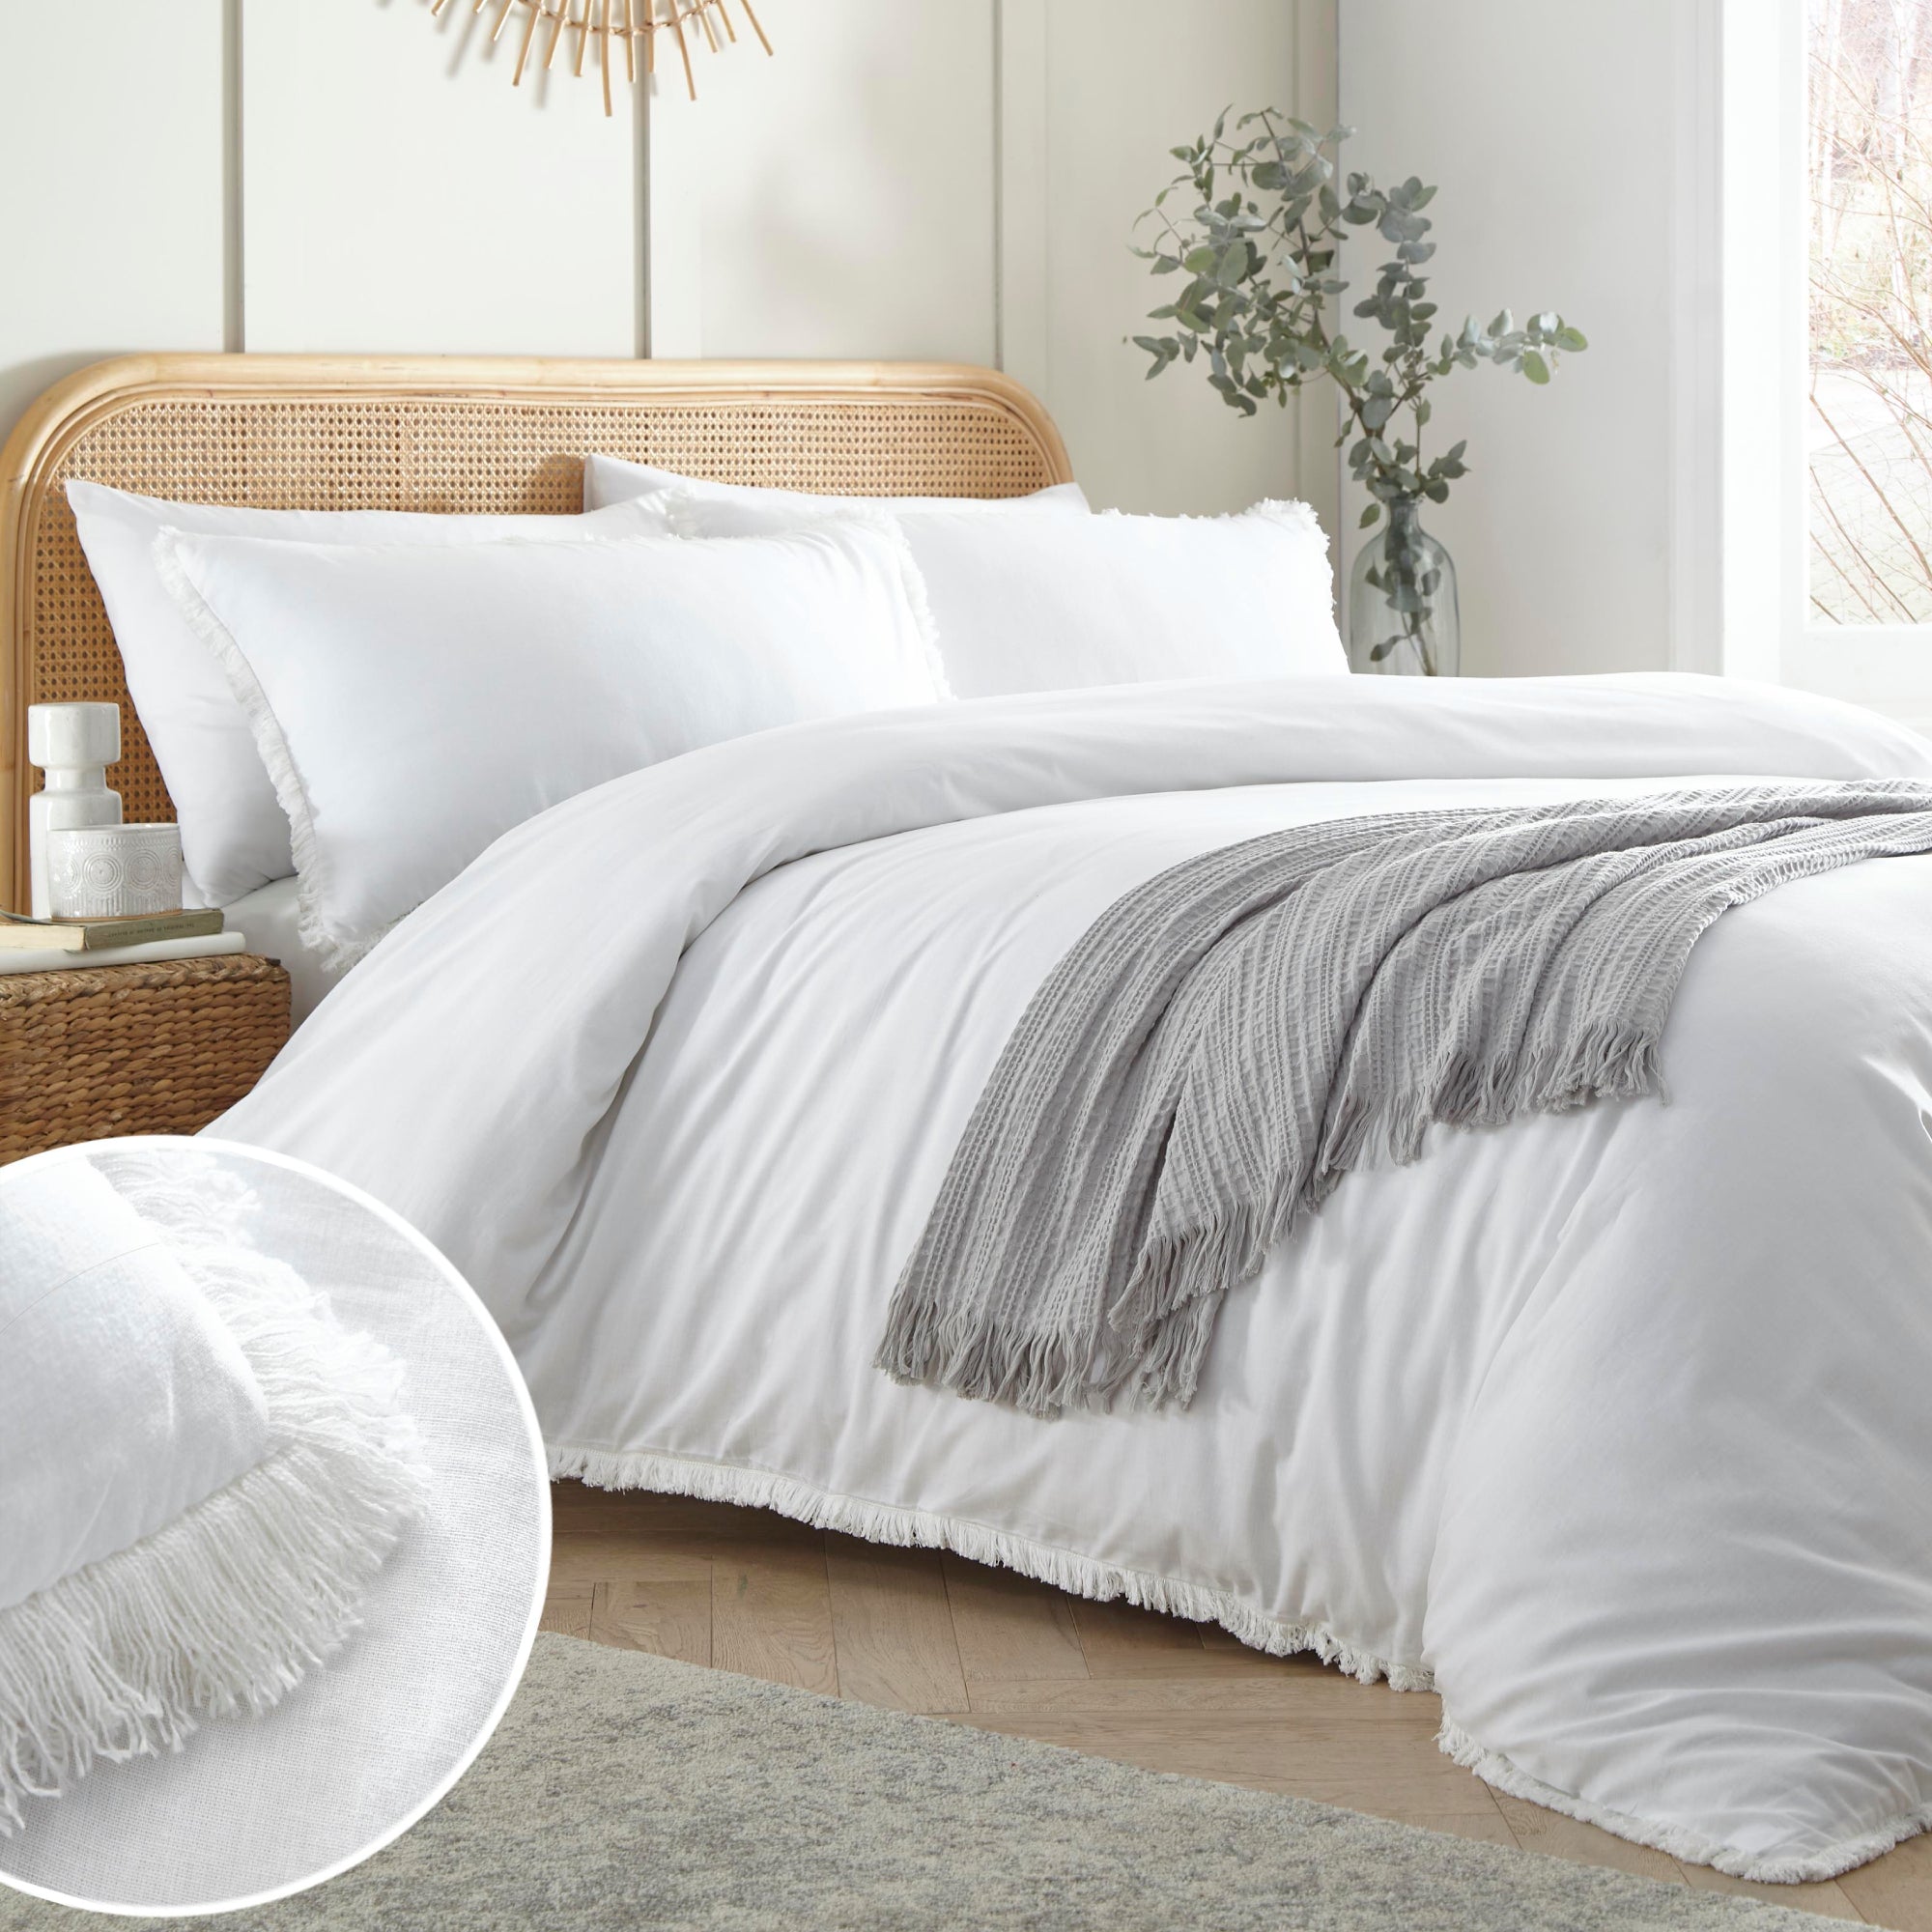 Duvet Cover Set Claire by Appletree Loft in White